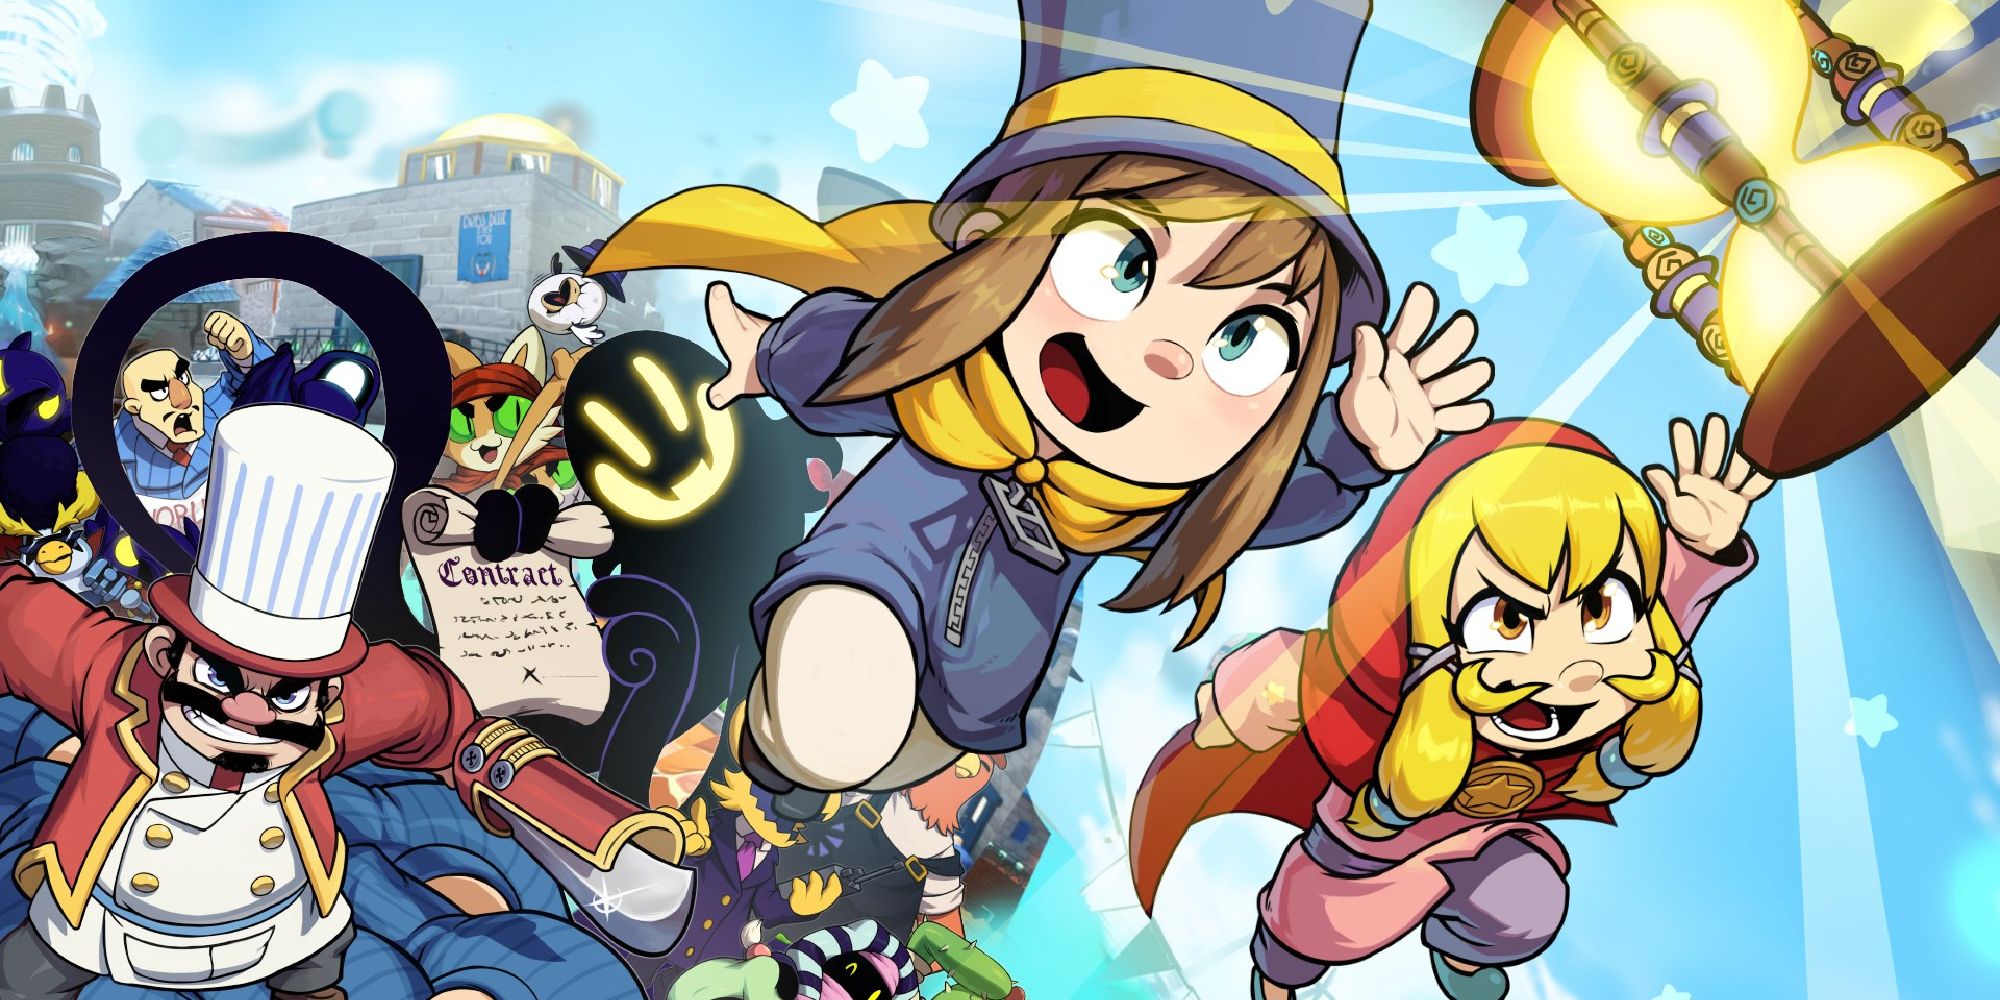 Key art for A Hat In Time, showing Hat Kid and Mustache Girl reaching for a timepiece as other characters chase them